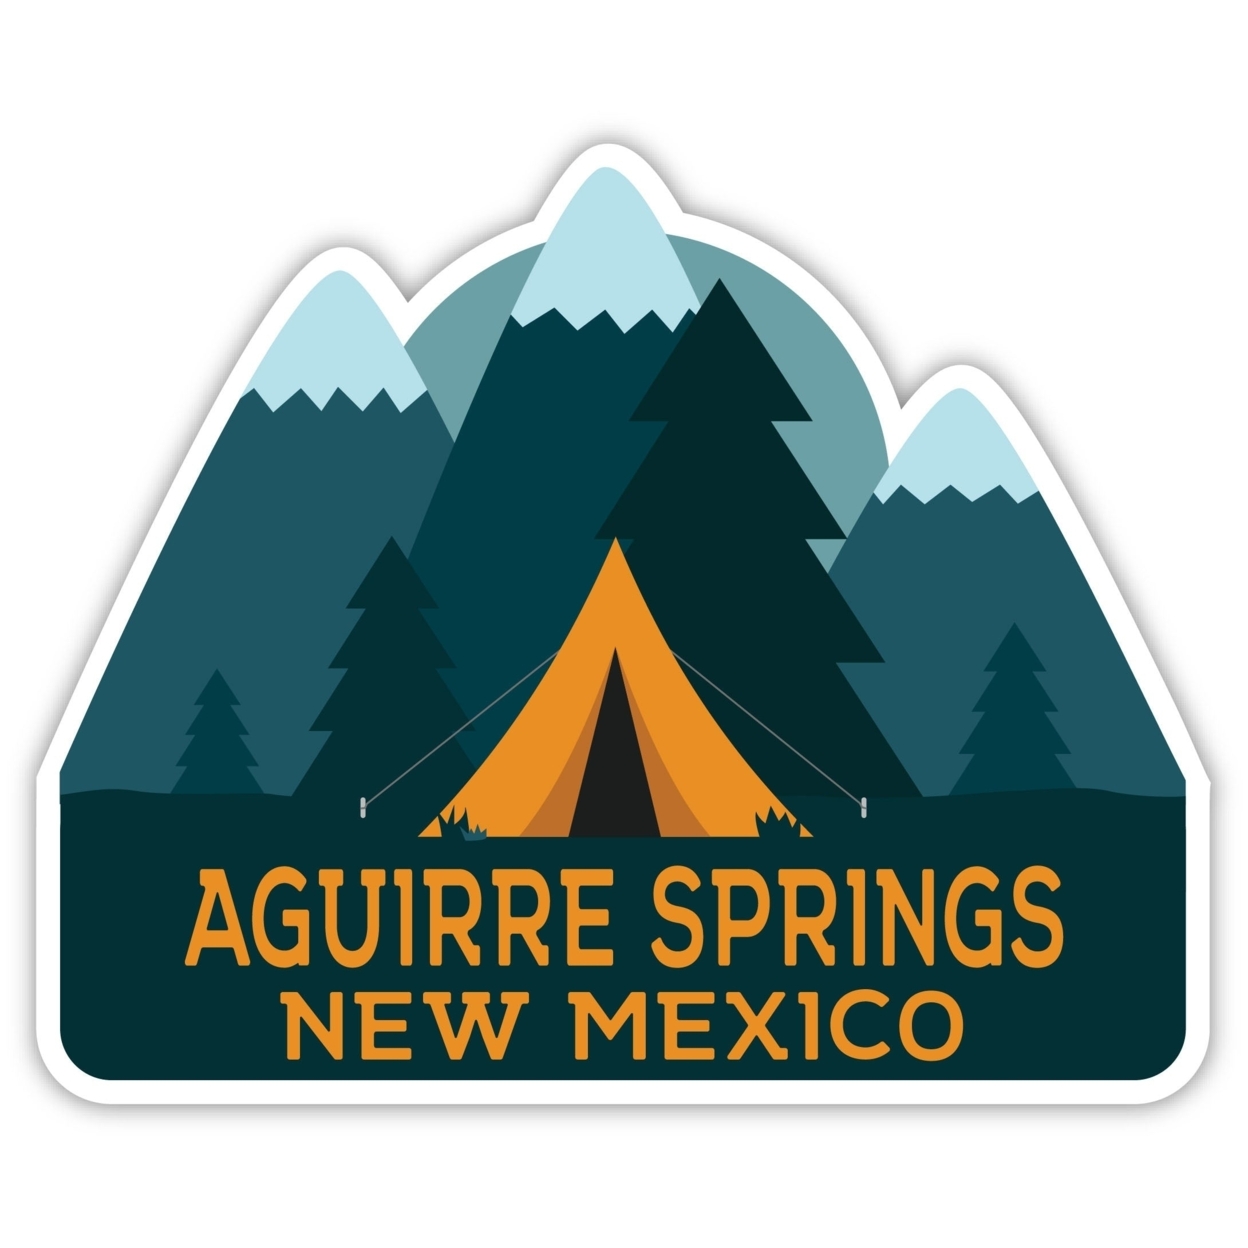 Aguirre Springs New Mexico Souvenir Decorative Stickers (Choose Theme And Size) - 4-Pack, 6-Inch, Tent